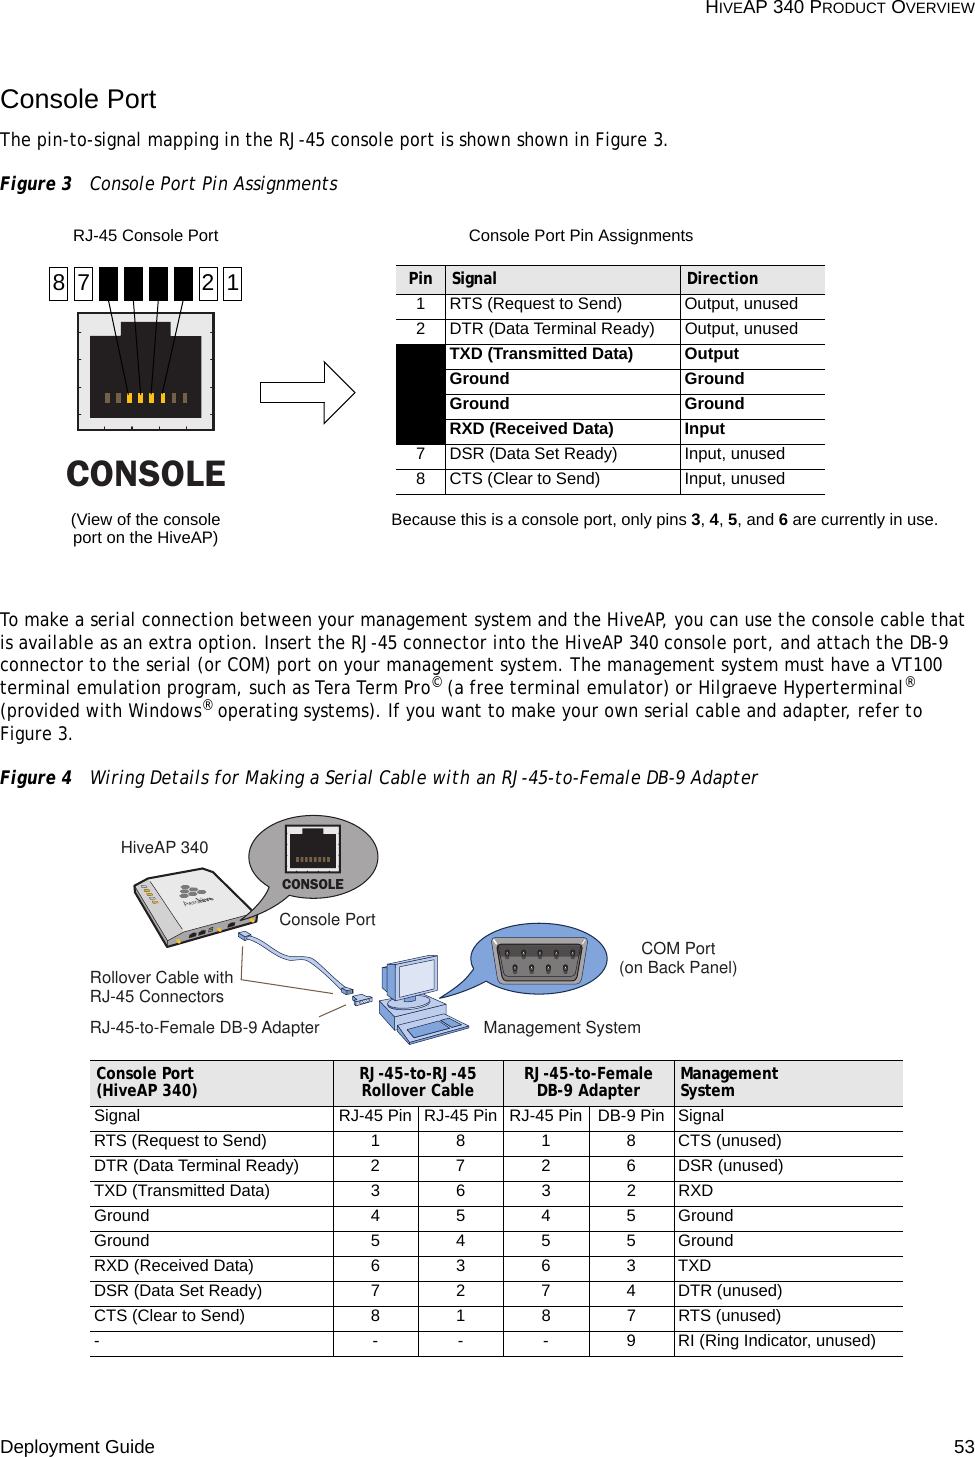 Deployment Guide 53 HIVEAP 340 PRODUCT OVERVIEWConsole PortThe pin-to-signal mapping in the RJ-45 console port is shown shown in Figure 3.Figure 3  Console Port Pin AssignmentsTo make a serial connection between your management system and the HiveAP, you can use the console cable that is available as an extra option. Insert the RJ-45 connector into the HiveAP 340 console port, and attach the DB-9 connector to the serial (or COM) port on your management system. The management system must have a VT100 terminal emulation program, such as Tera Term Pro© (a free terminal emulator) or Hilgraeve Hyperterminal® (provided with Windows® operating systems). If you want to make your own serial cable and adapter, refer to Figure 3.Figure 4  Wiring Details for Making a Serial Cable with an RJ-45-to-Female DB-9 AdapterCONSOLEPin Signal Direction1 RTS (Request to Send) Output, unused2 DTR (Data Terminal Ready) Output, unusedTXD (Transmitted Data) OutputGround GroundGround GroundRXD (Received Data) Input7 DSR (Data Set Ready) Input, unused8 CTS (Clear to Send) Input, unusedRJ-45 Console Port(View of the console port on the HiveAP) Because this is a console port, only pins 3, 4, 5, and 6 are currently in use.Console Port Pin Assignments17 28Rollover Cable with RJ-45 ConnectorsRJ-45-to-Female DB-9 AdapterConsole PortCOM Port (on Back Panel)CONSOLEManagement SystemHiveAP 340Console Port (HiveAP 340) RJ-45-to-RJ-45 Rollover Cable RJ-45-to-Female DB-9 Adapter Management SystemSignal RJ-45 Pin RJ-45 Pin RJ-45 Pin DB-9 Pin SignalRTS (Request to Send) 1 8 1 8 CTS (unused)DTR (Data Terminal Ready) 2 7 2 6 DSR (unused)TXD (Transmitted Data) 3 6 3 2 RXDGround 4 5 4 5 GroundGround 5 4 5 5 GroundRXD (Received Data) 6 3 6 3 TXDDSR (Data Set Ready) 7 2 7 4 DTR (unused)CTS (Clear to Send) 8 1 8 7 RTS (unused)- - - - 9 RI (Ring Indicator, unused)